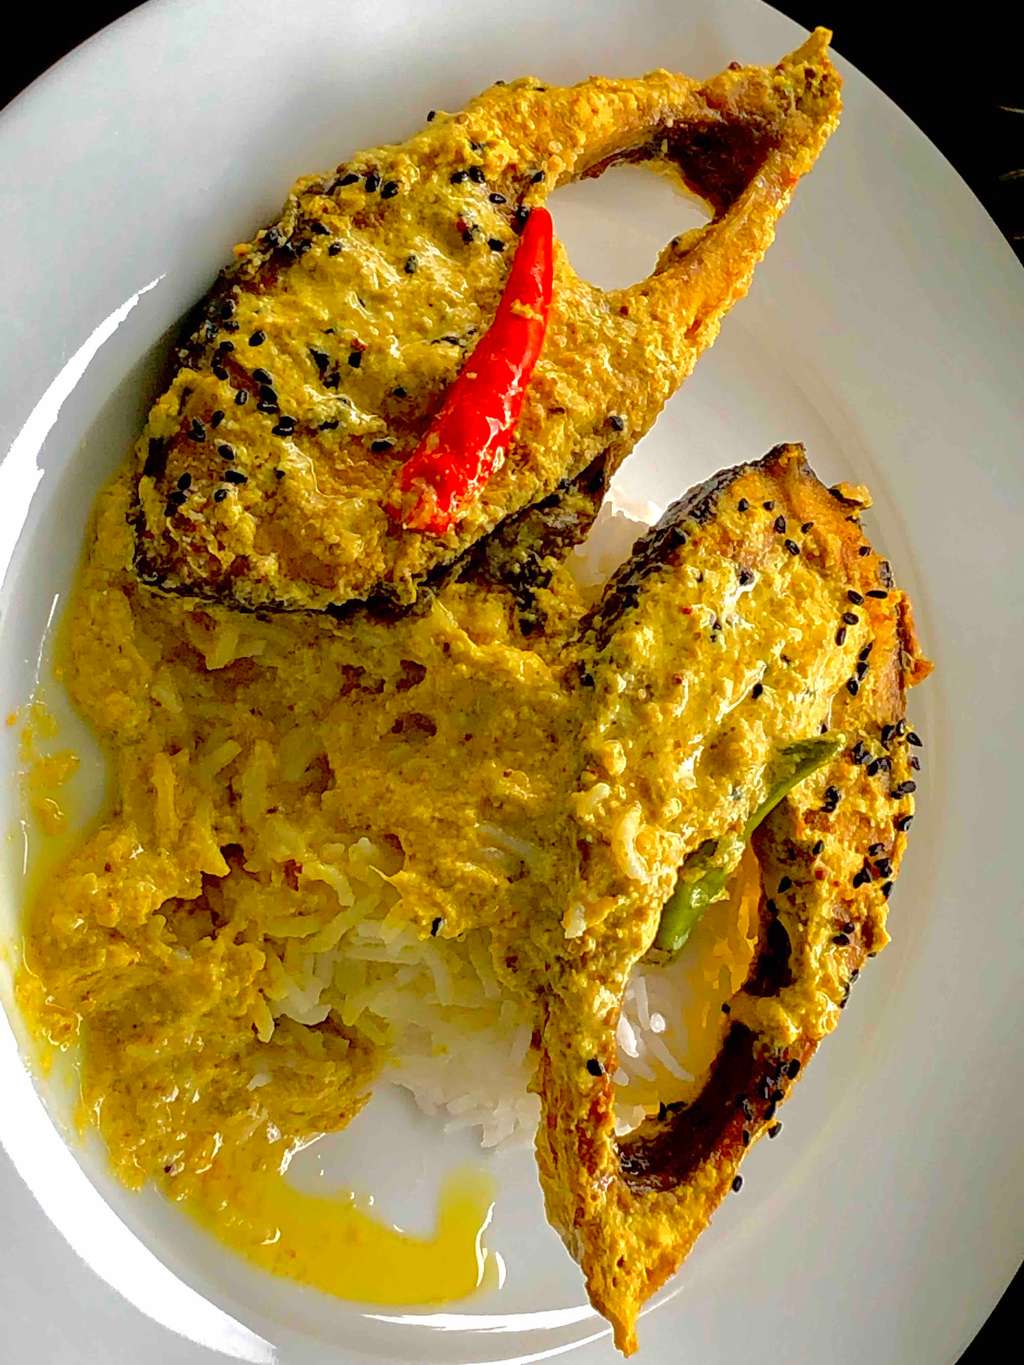 steamed fish curry in curd ( serves 3 people )